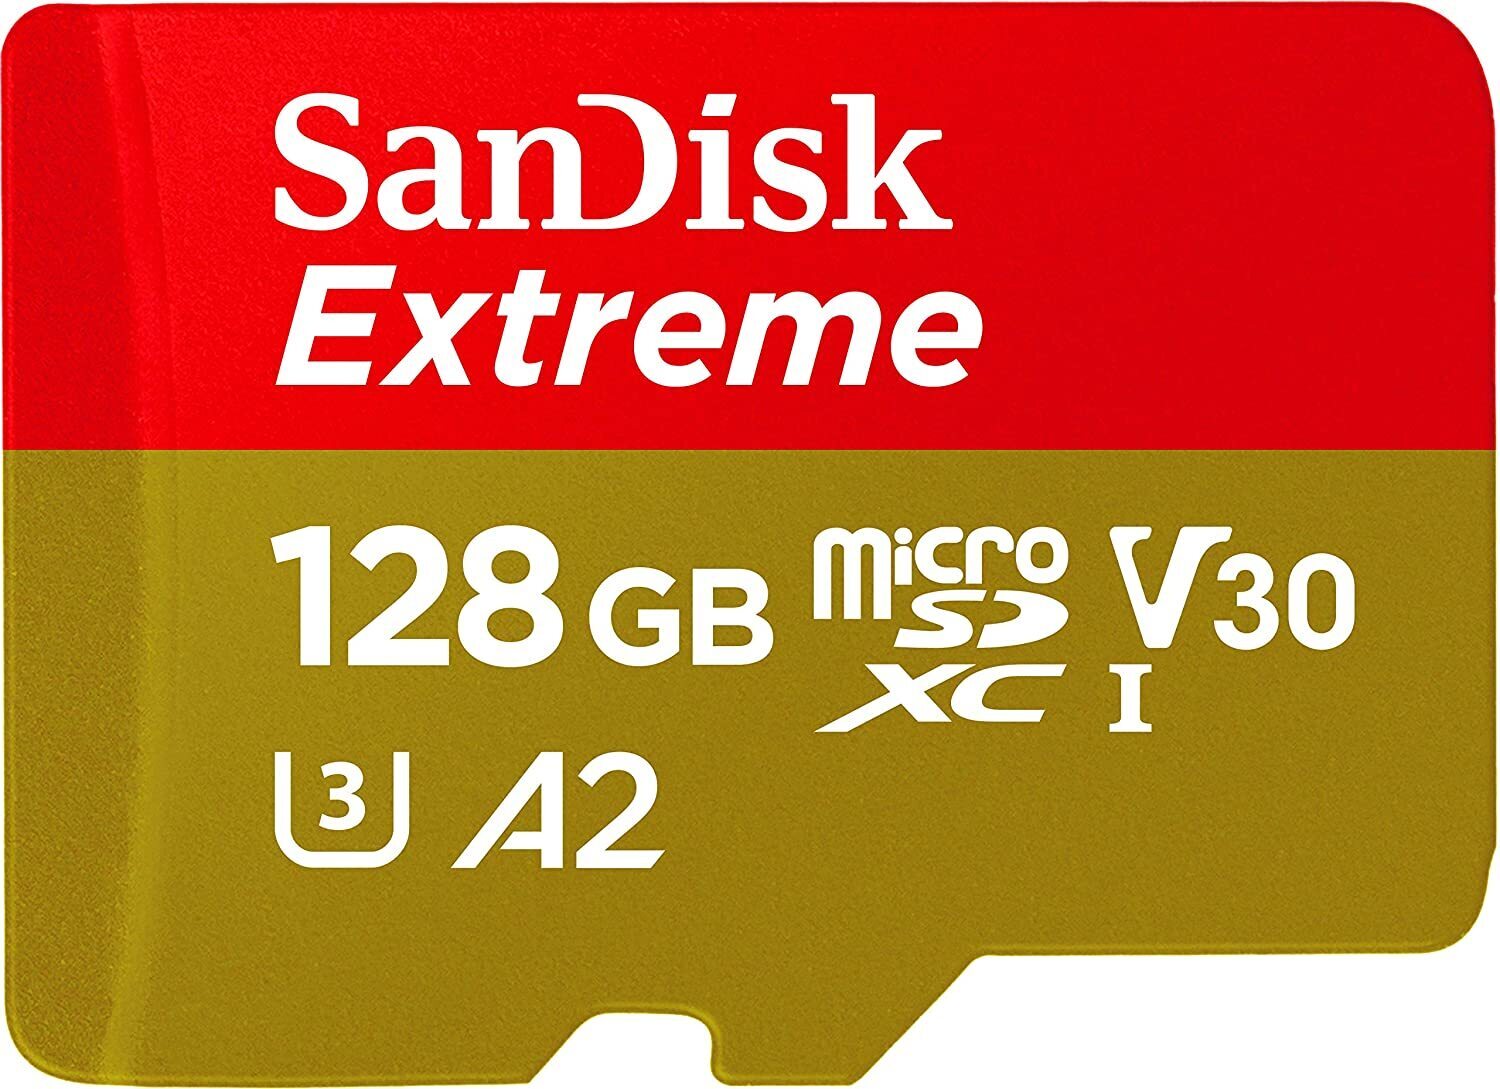 SanDisk Extreme 128GB Micro SD Card SDXC UHS-I Action Camera GoPro Memory Card 4K U3 160Mb/s A2